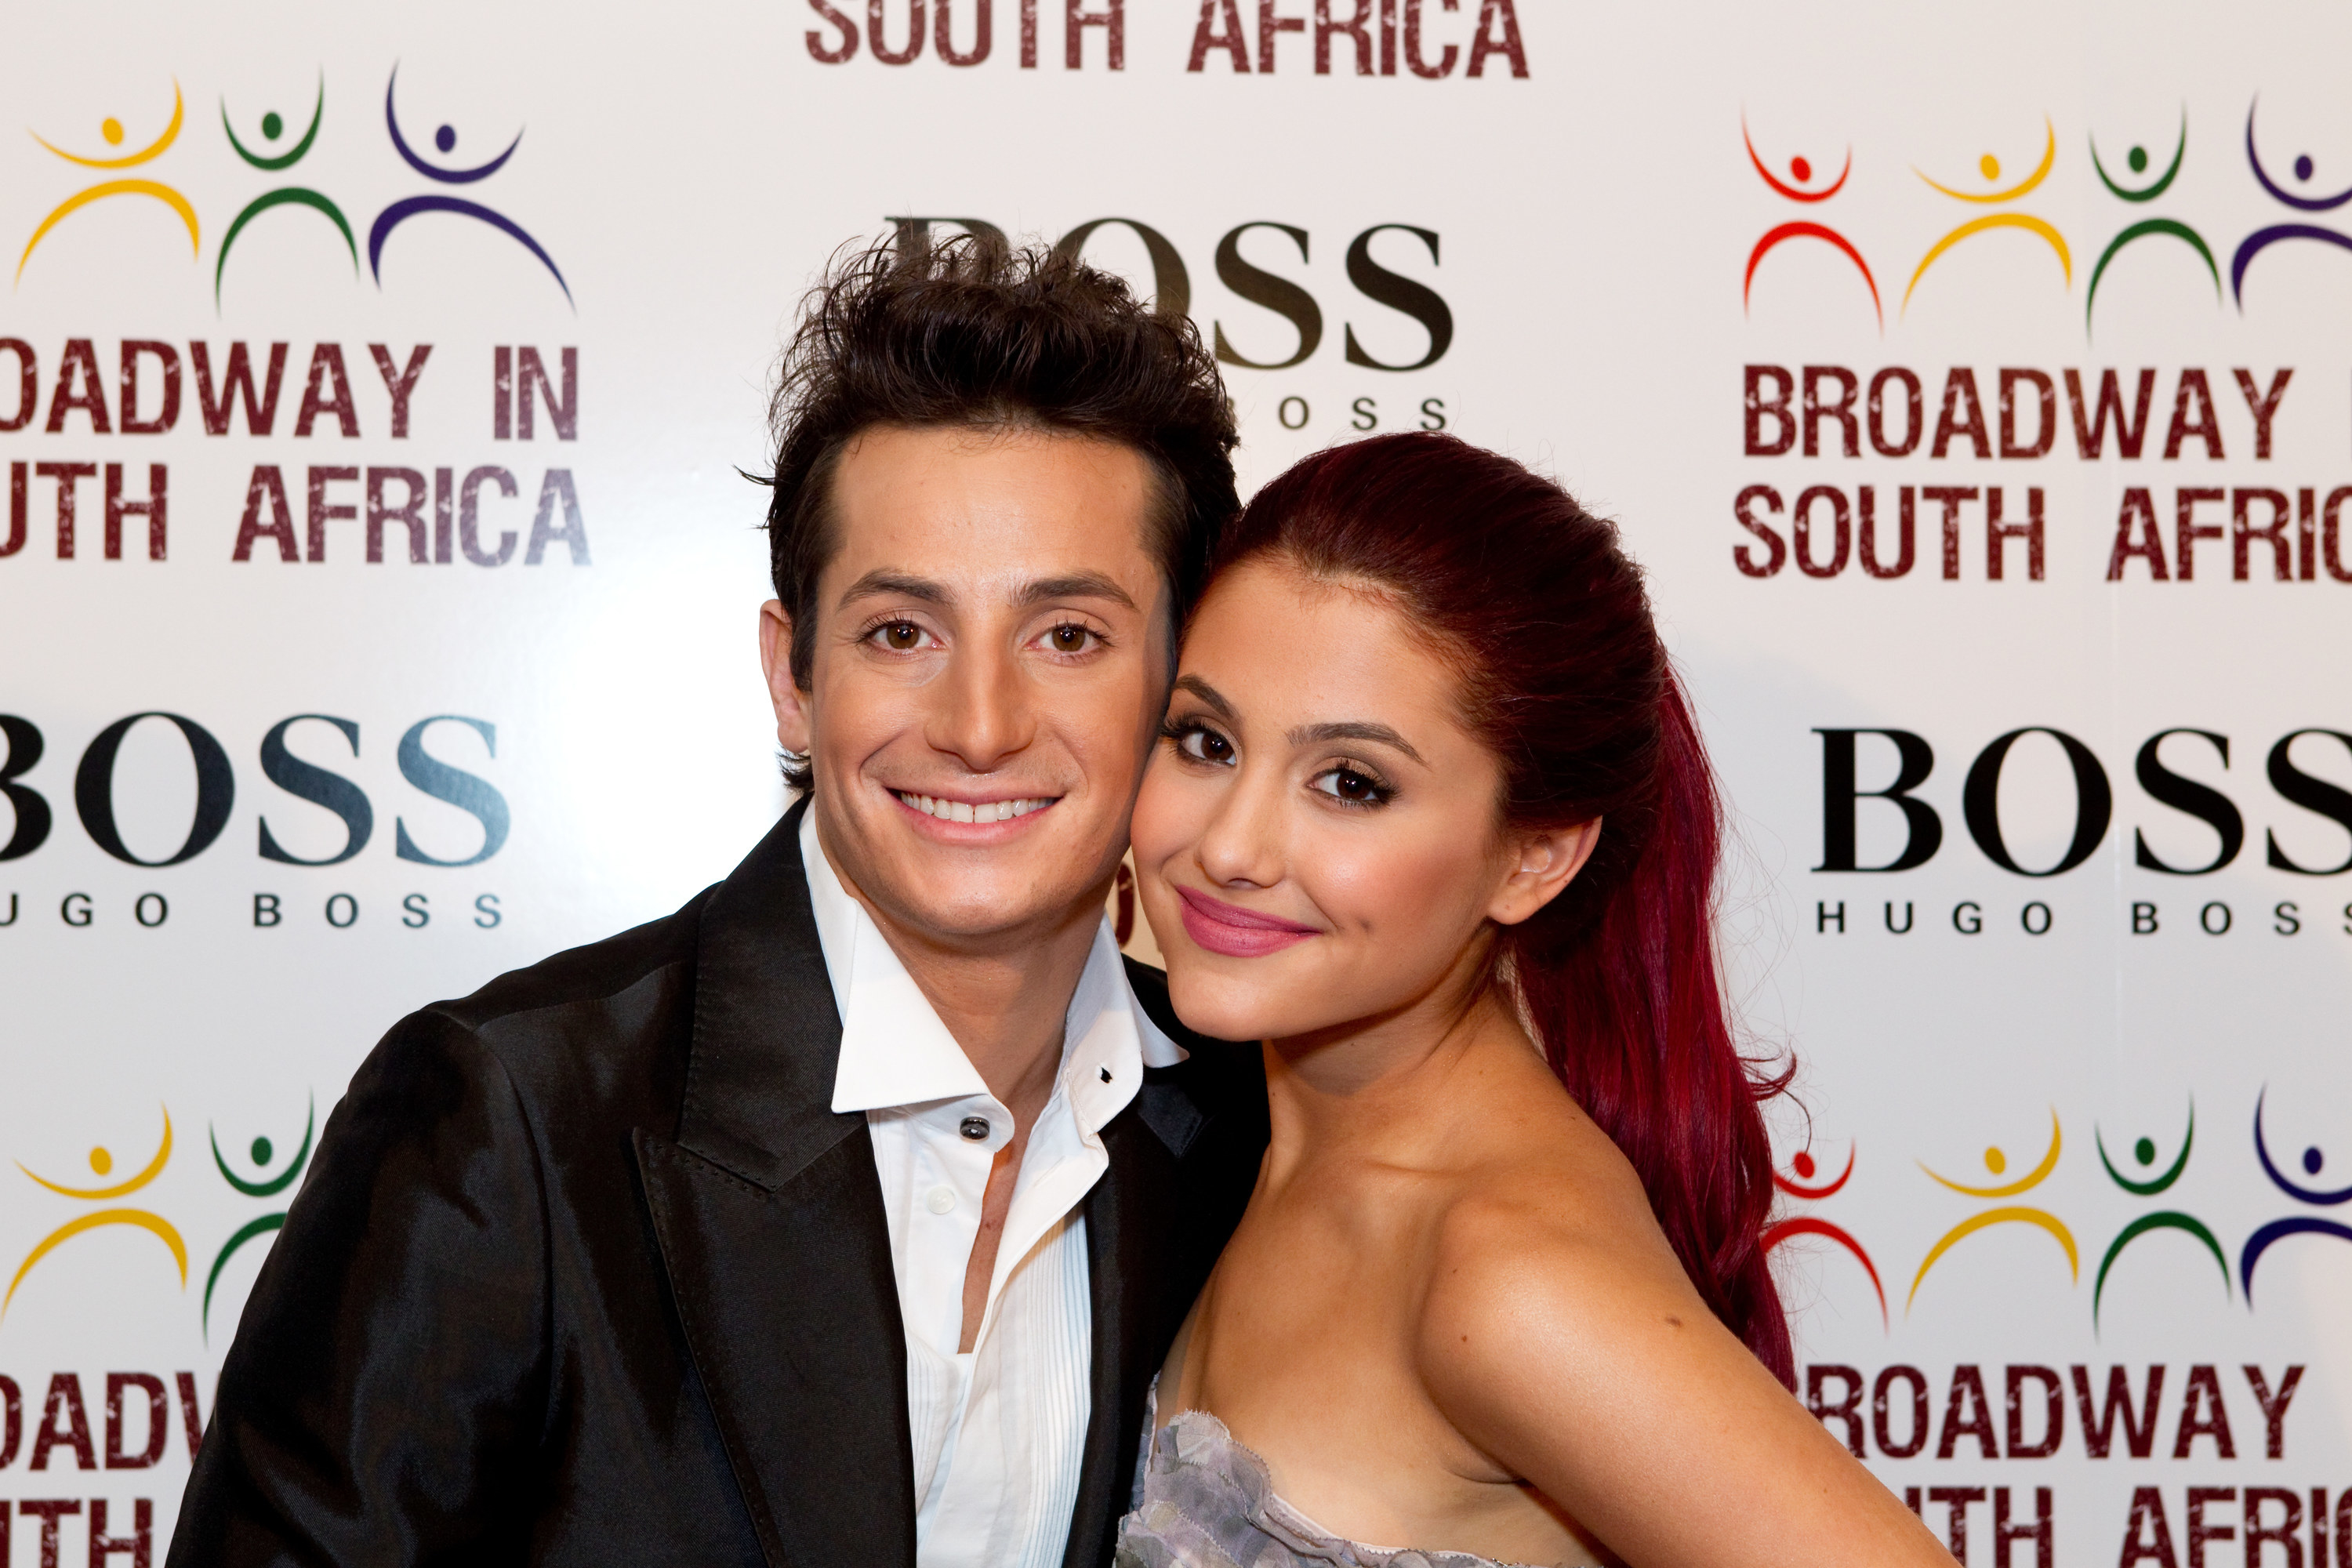 Ariana Grande and Frankie Grande at the 2010_10_04 Broadway In South Africa Concert